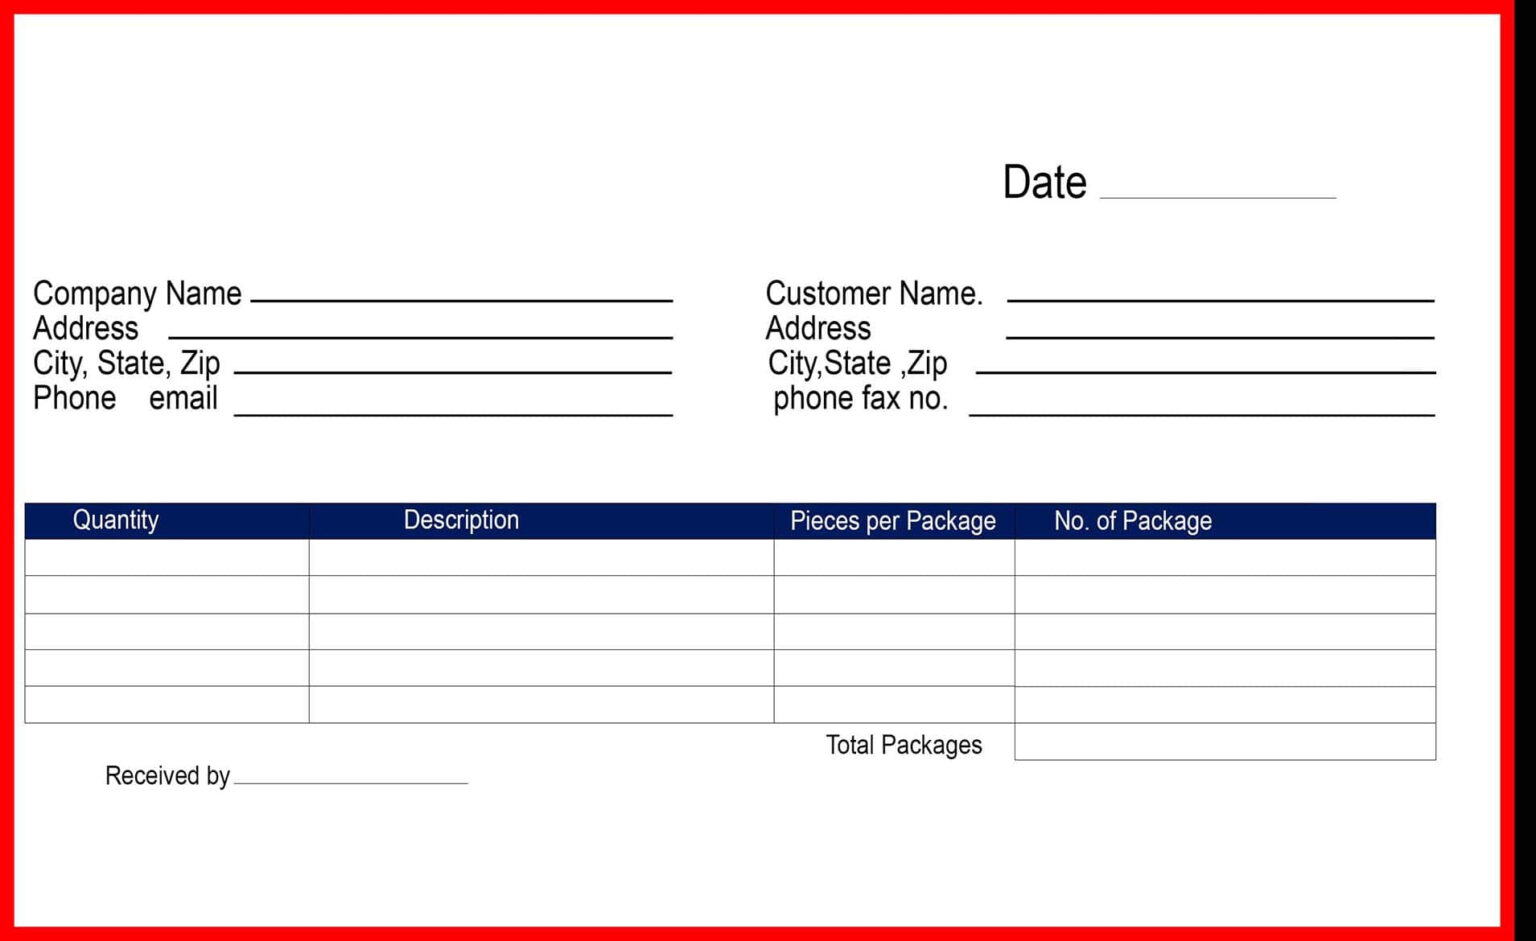 free-delivery-receipt-template-pdf-word-doc-excel-the-throughout